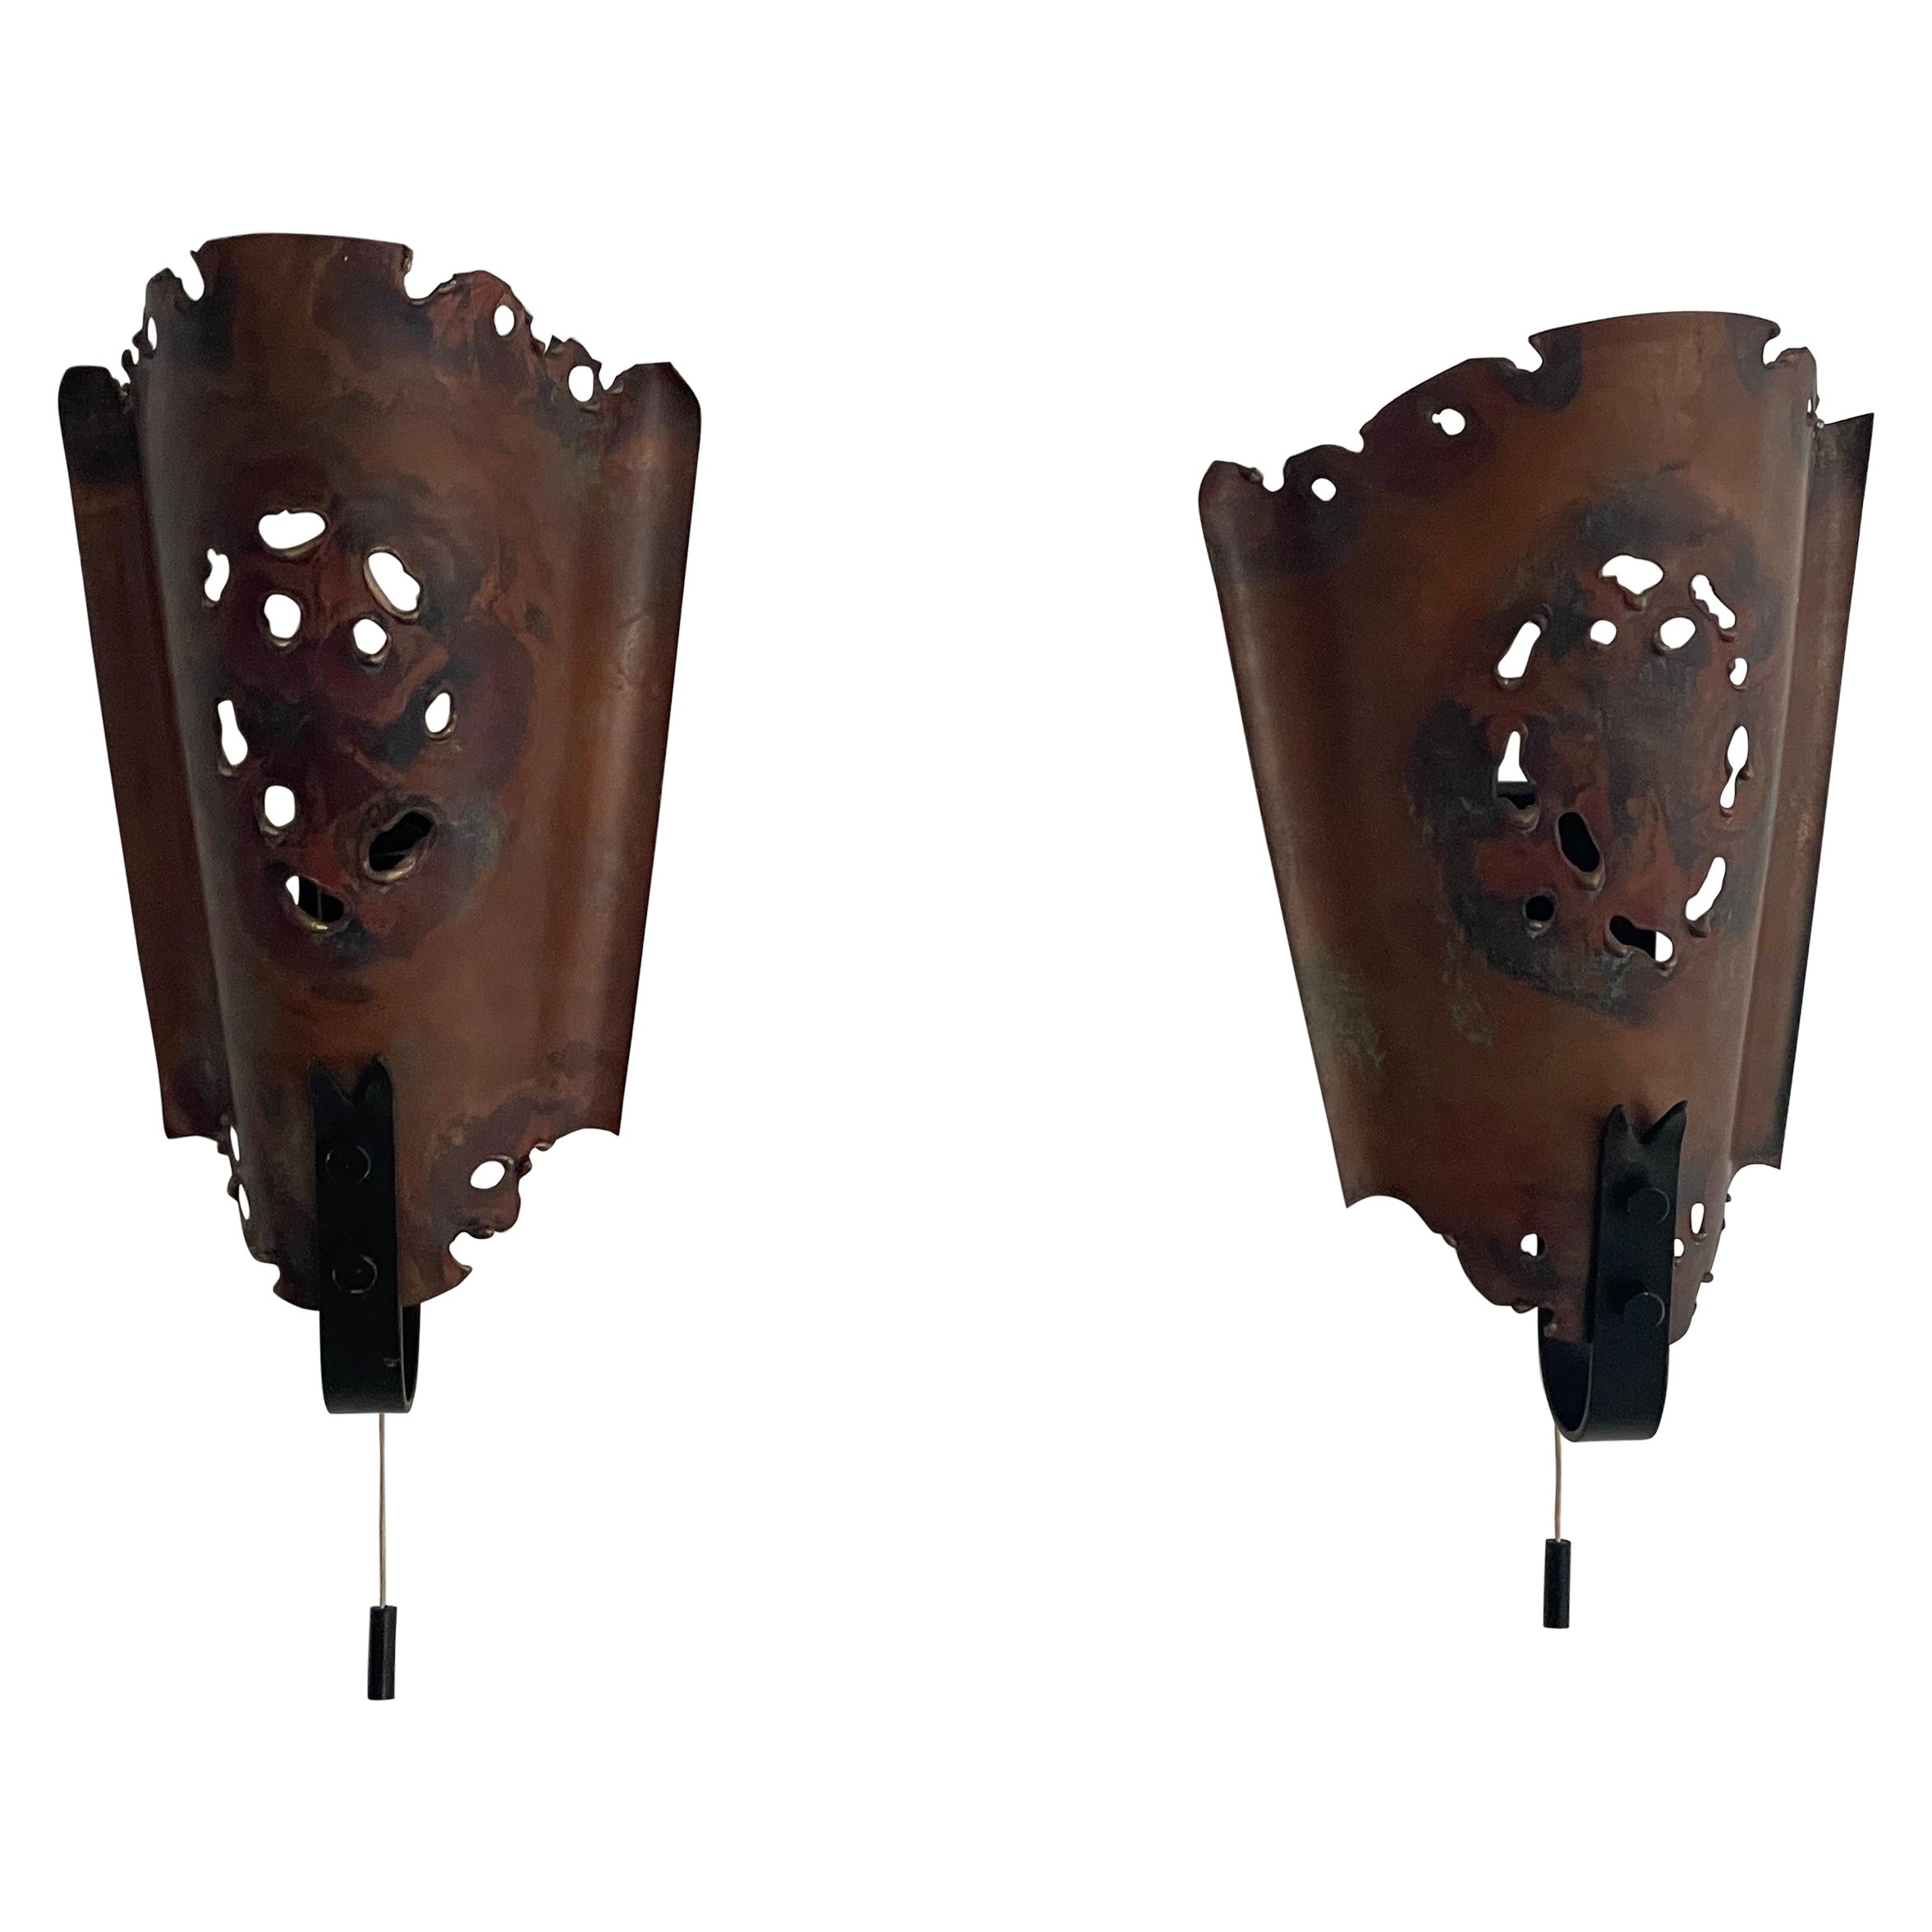 Brutalist Style Copper Pair of Sconces, 1960s, Germany For Sale